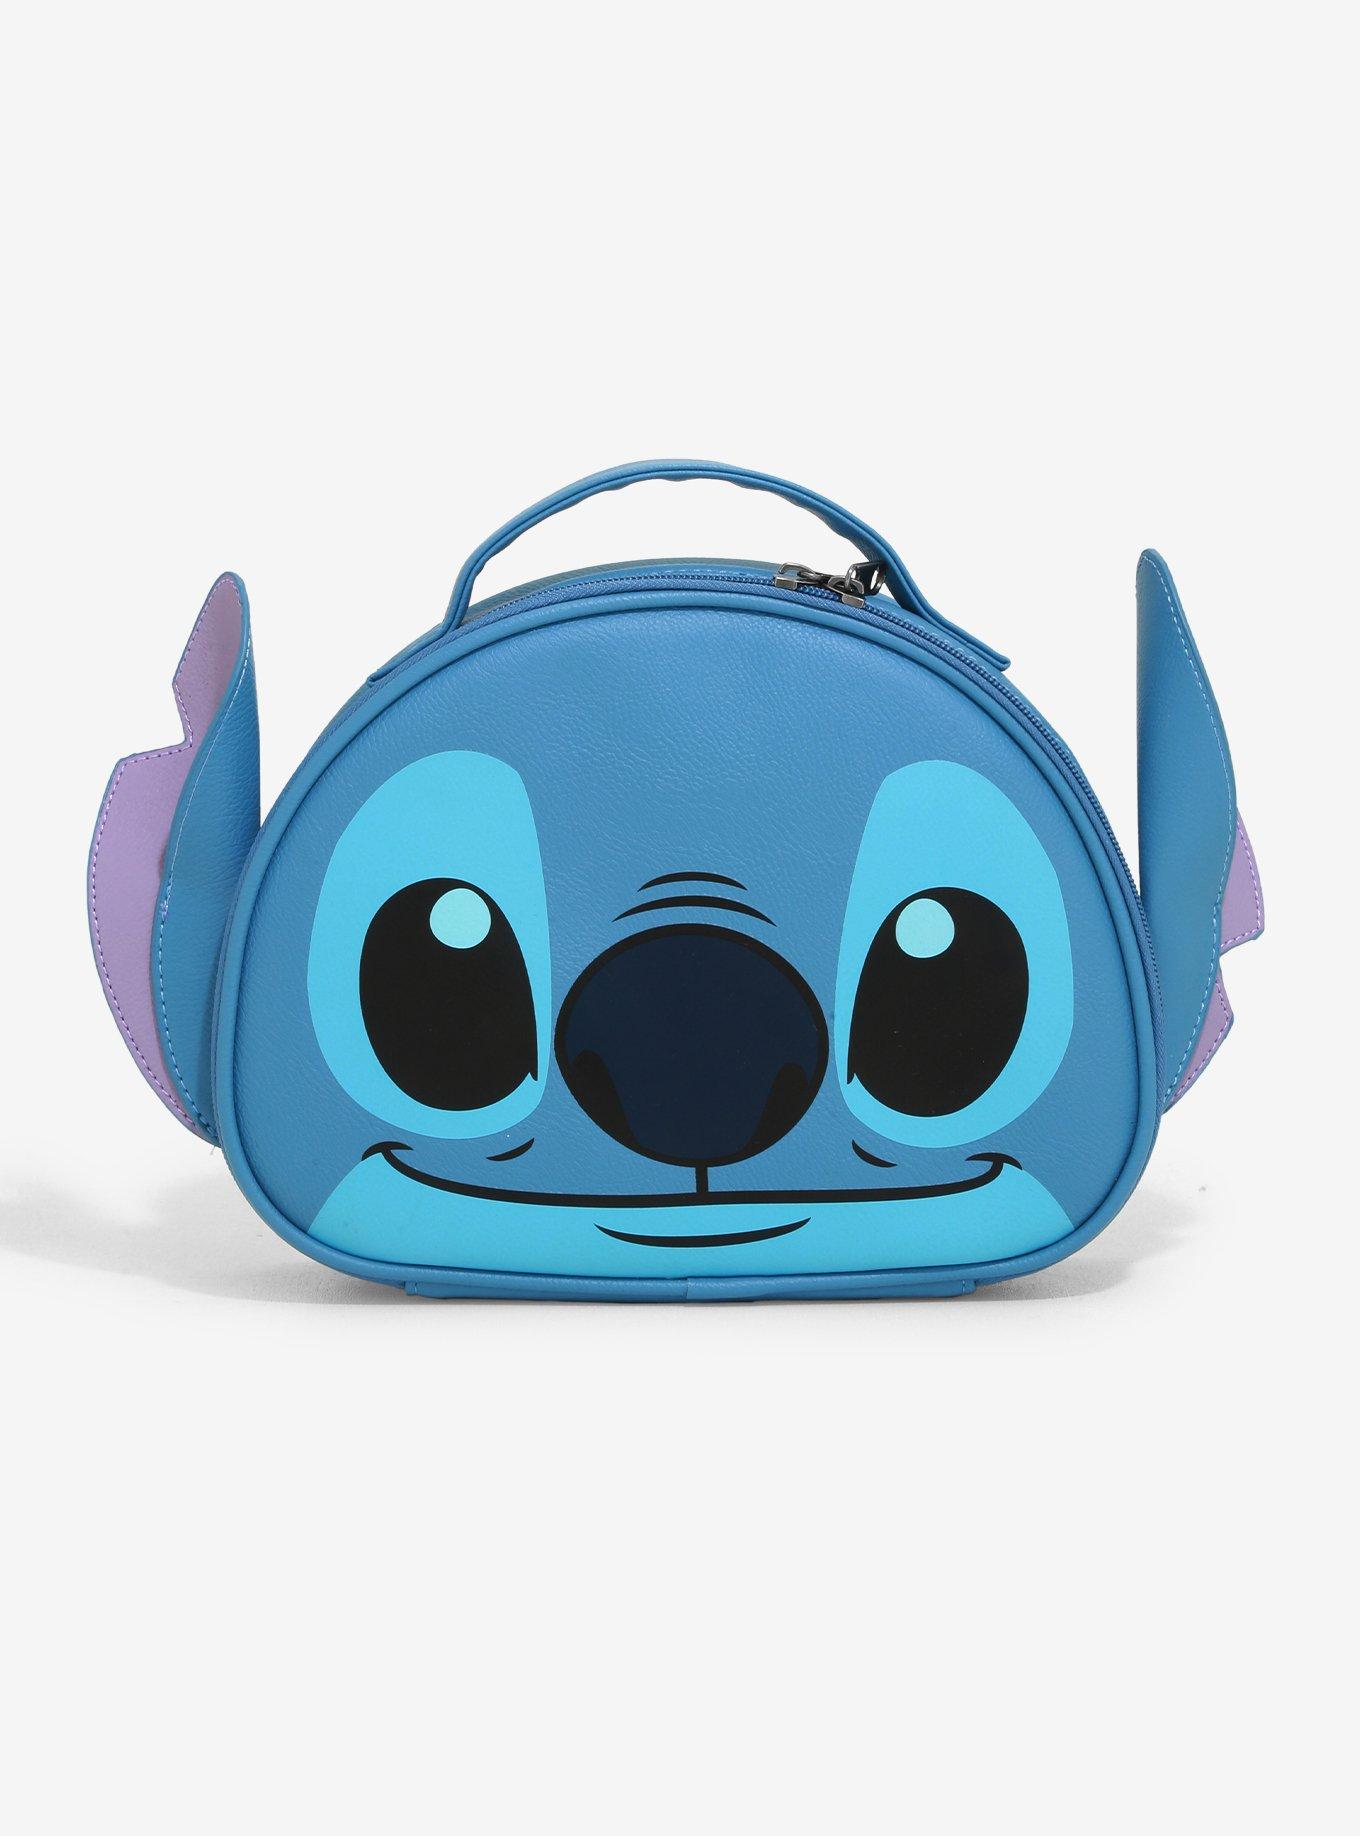 Disney Lilo & Stitch - Let's Get Weird Insulated Lunch Tote